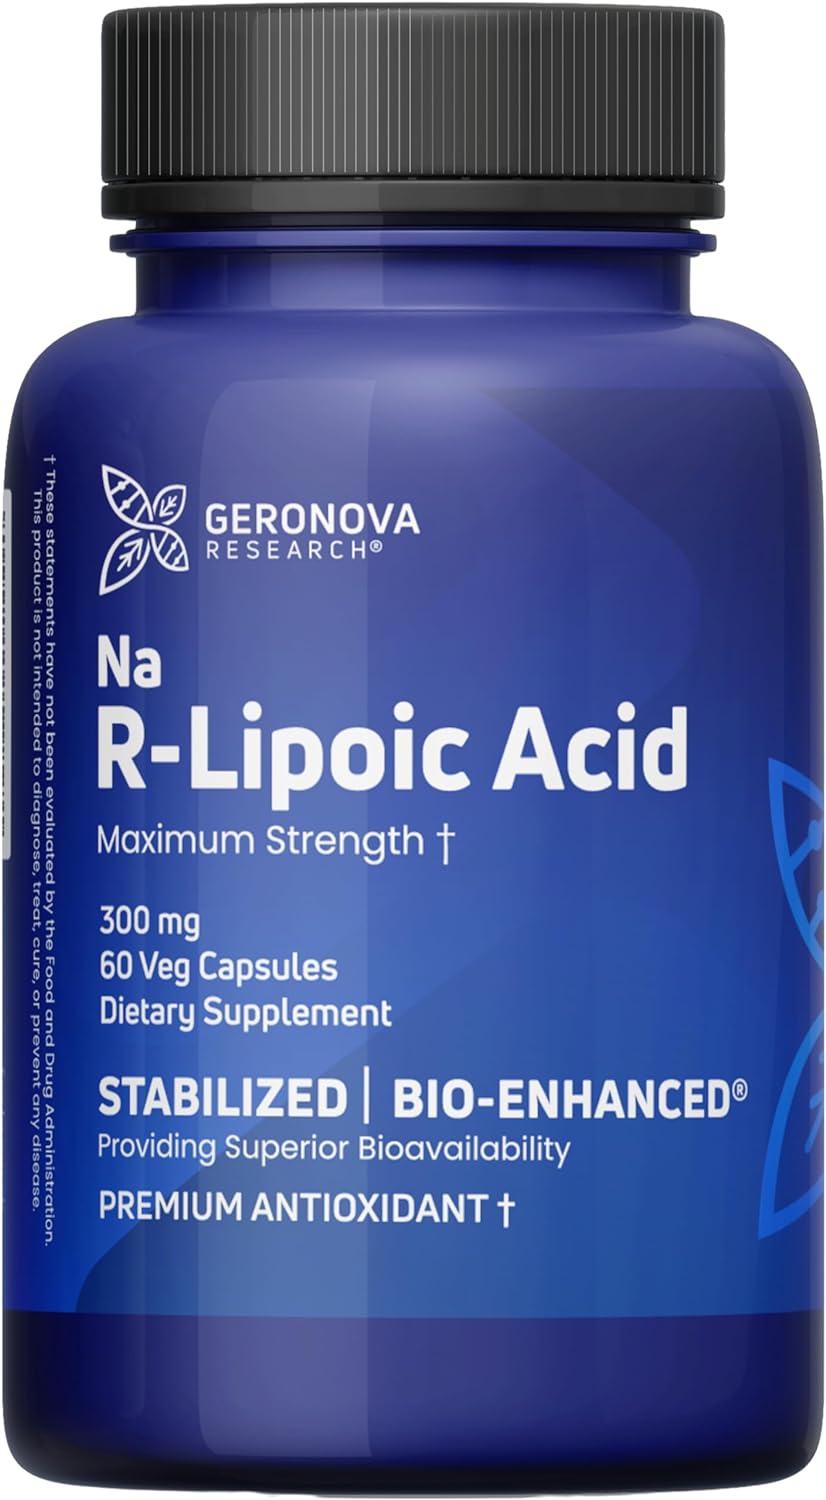 Geronova Research R-Lipoic Acid 300mg 60 Caps - Stabilized R-Alpha Lipoic Acid with Superior Bioavailability, Metabolic Activity & Healthy Aging Support - Gluten Free & Non-GMO Antioxidant Supplement